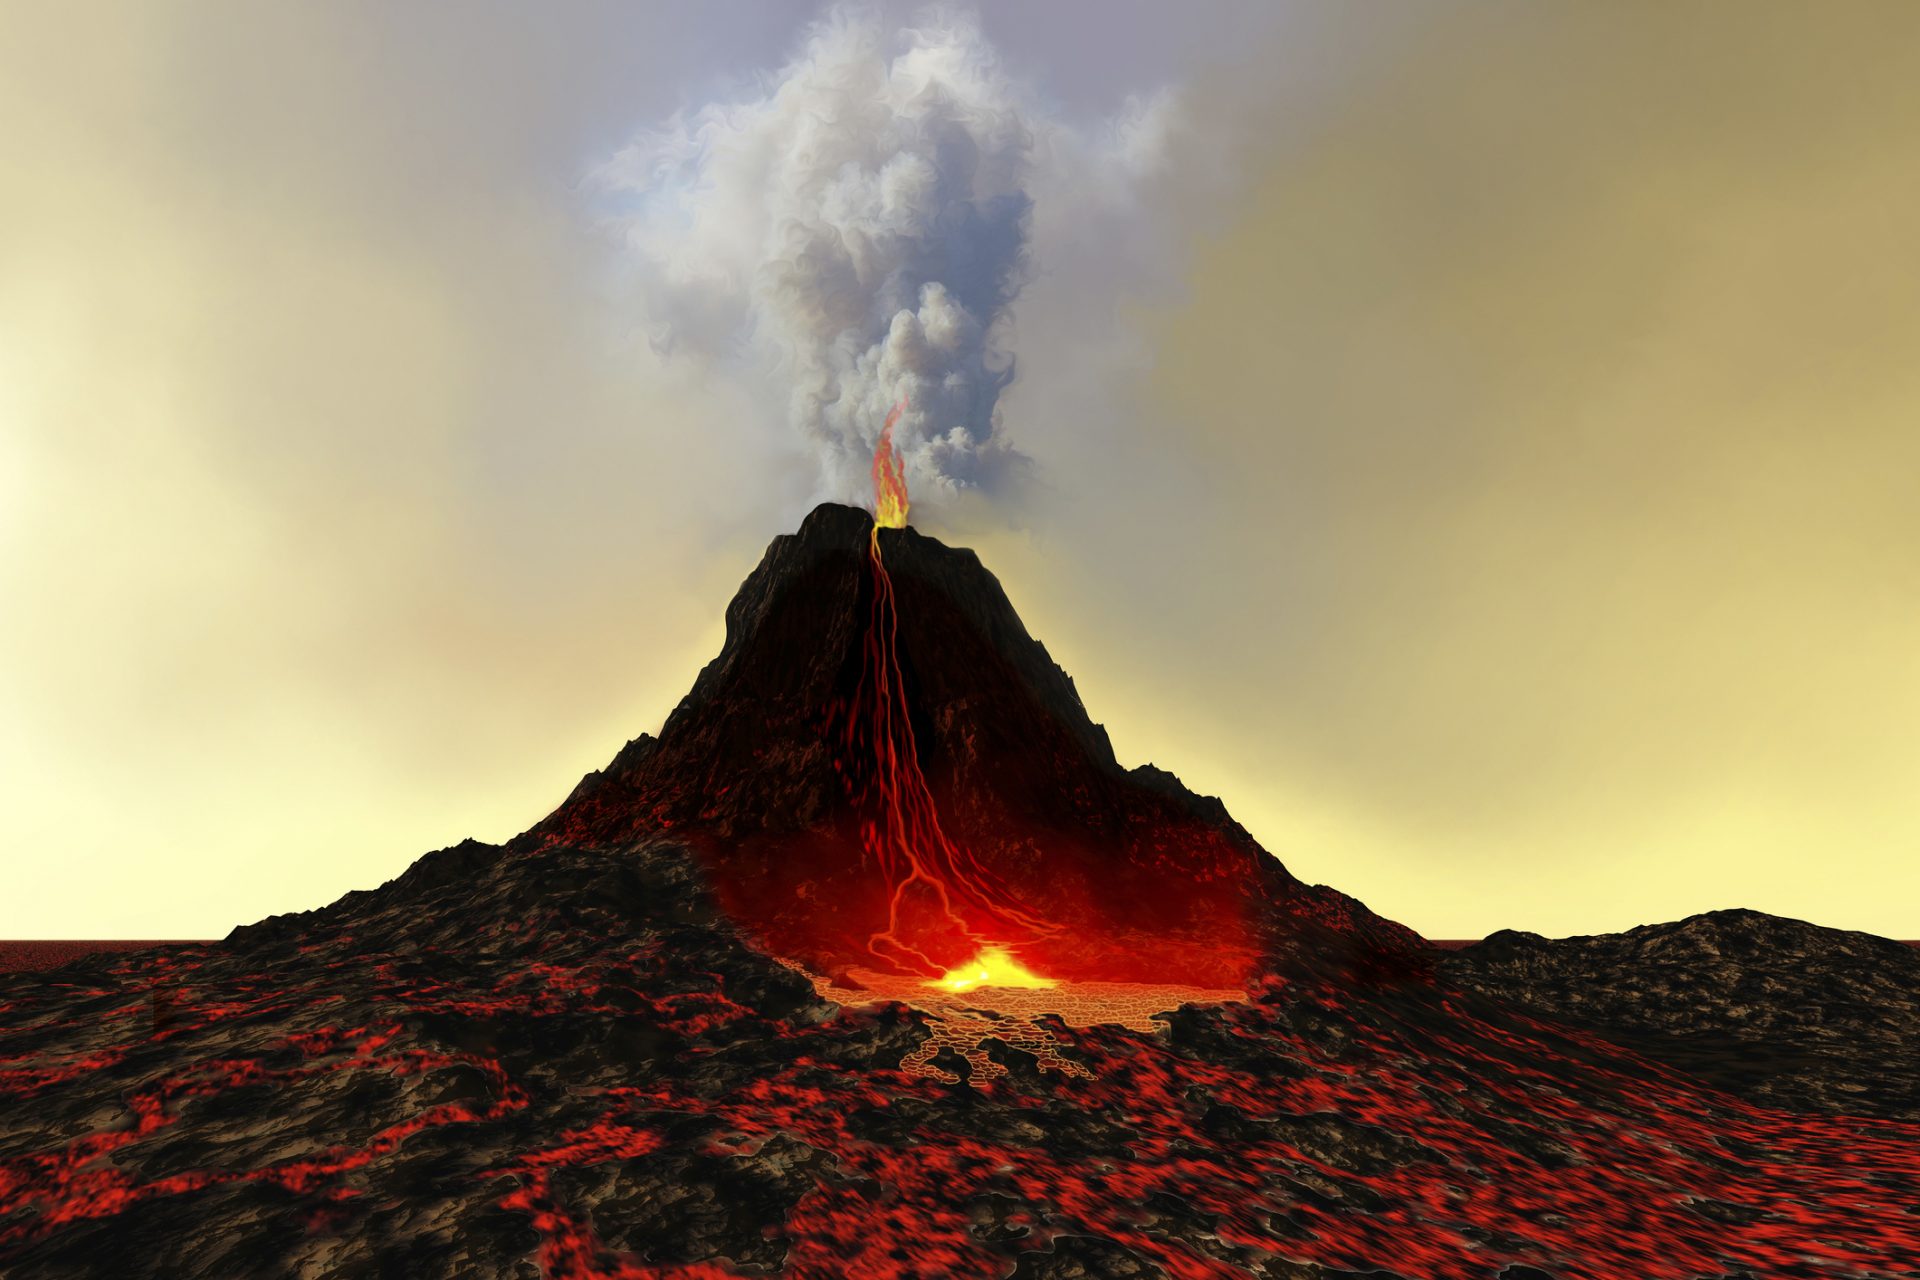 Volcanoes triggered a climate event